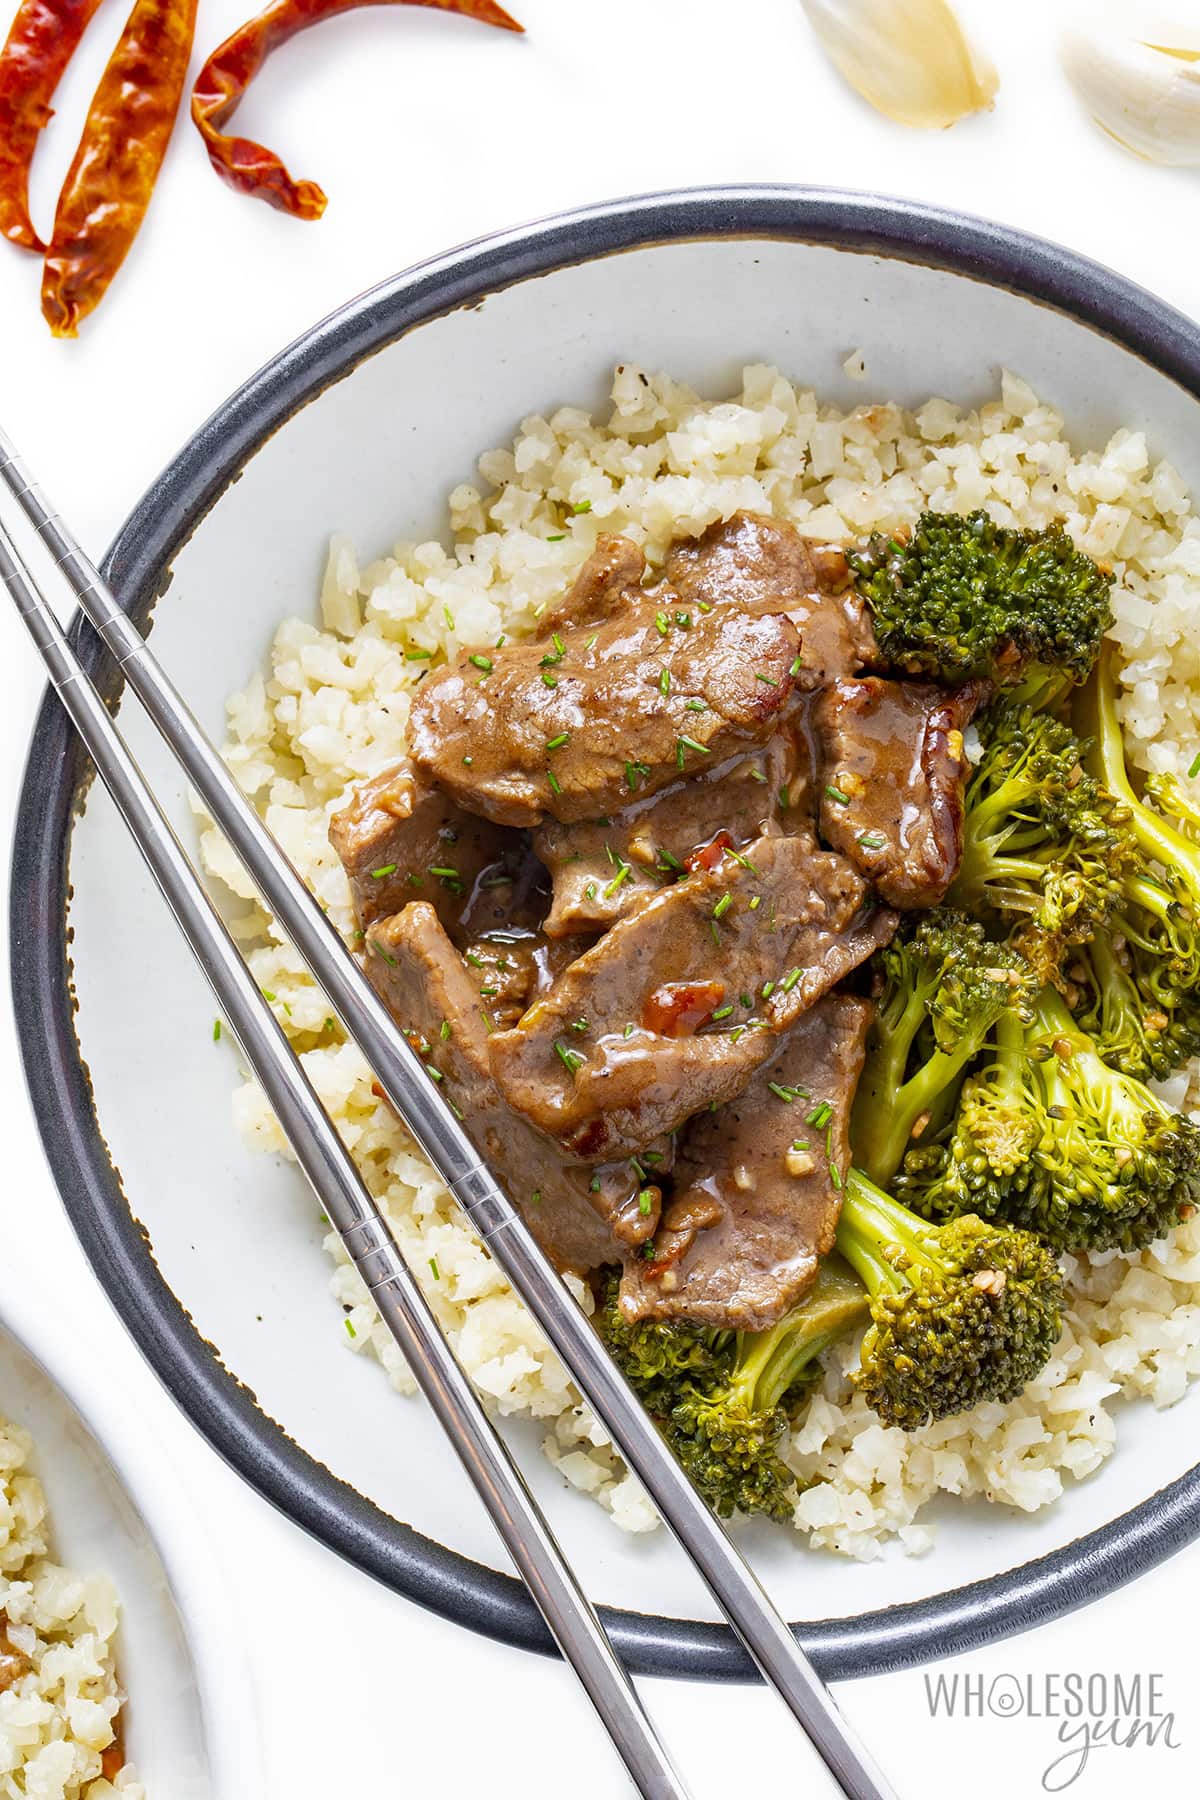 Hunan beef over a bed of cauliflower rice with broccoli.